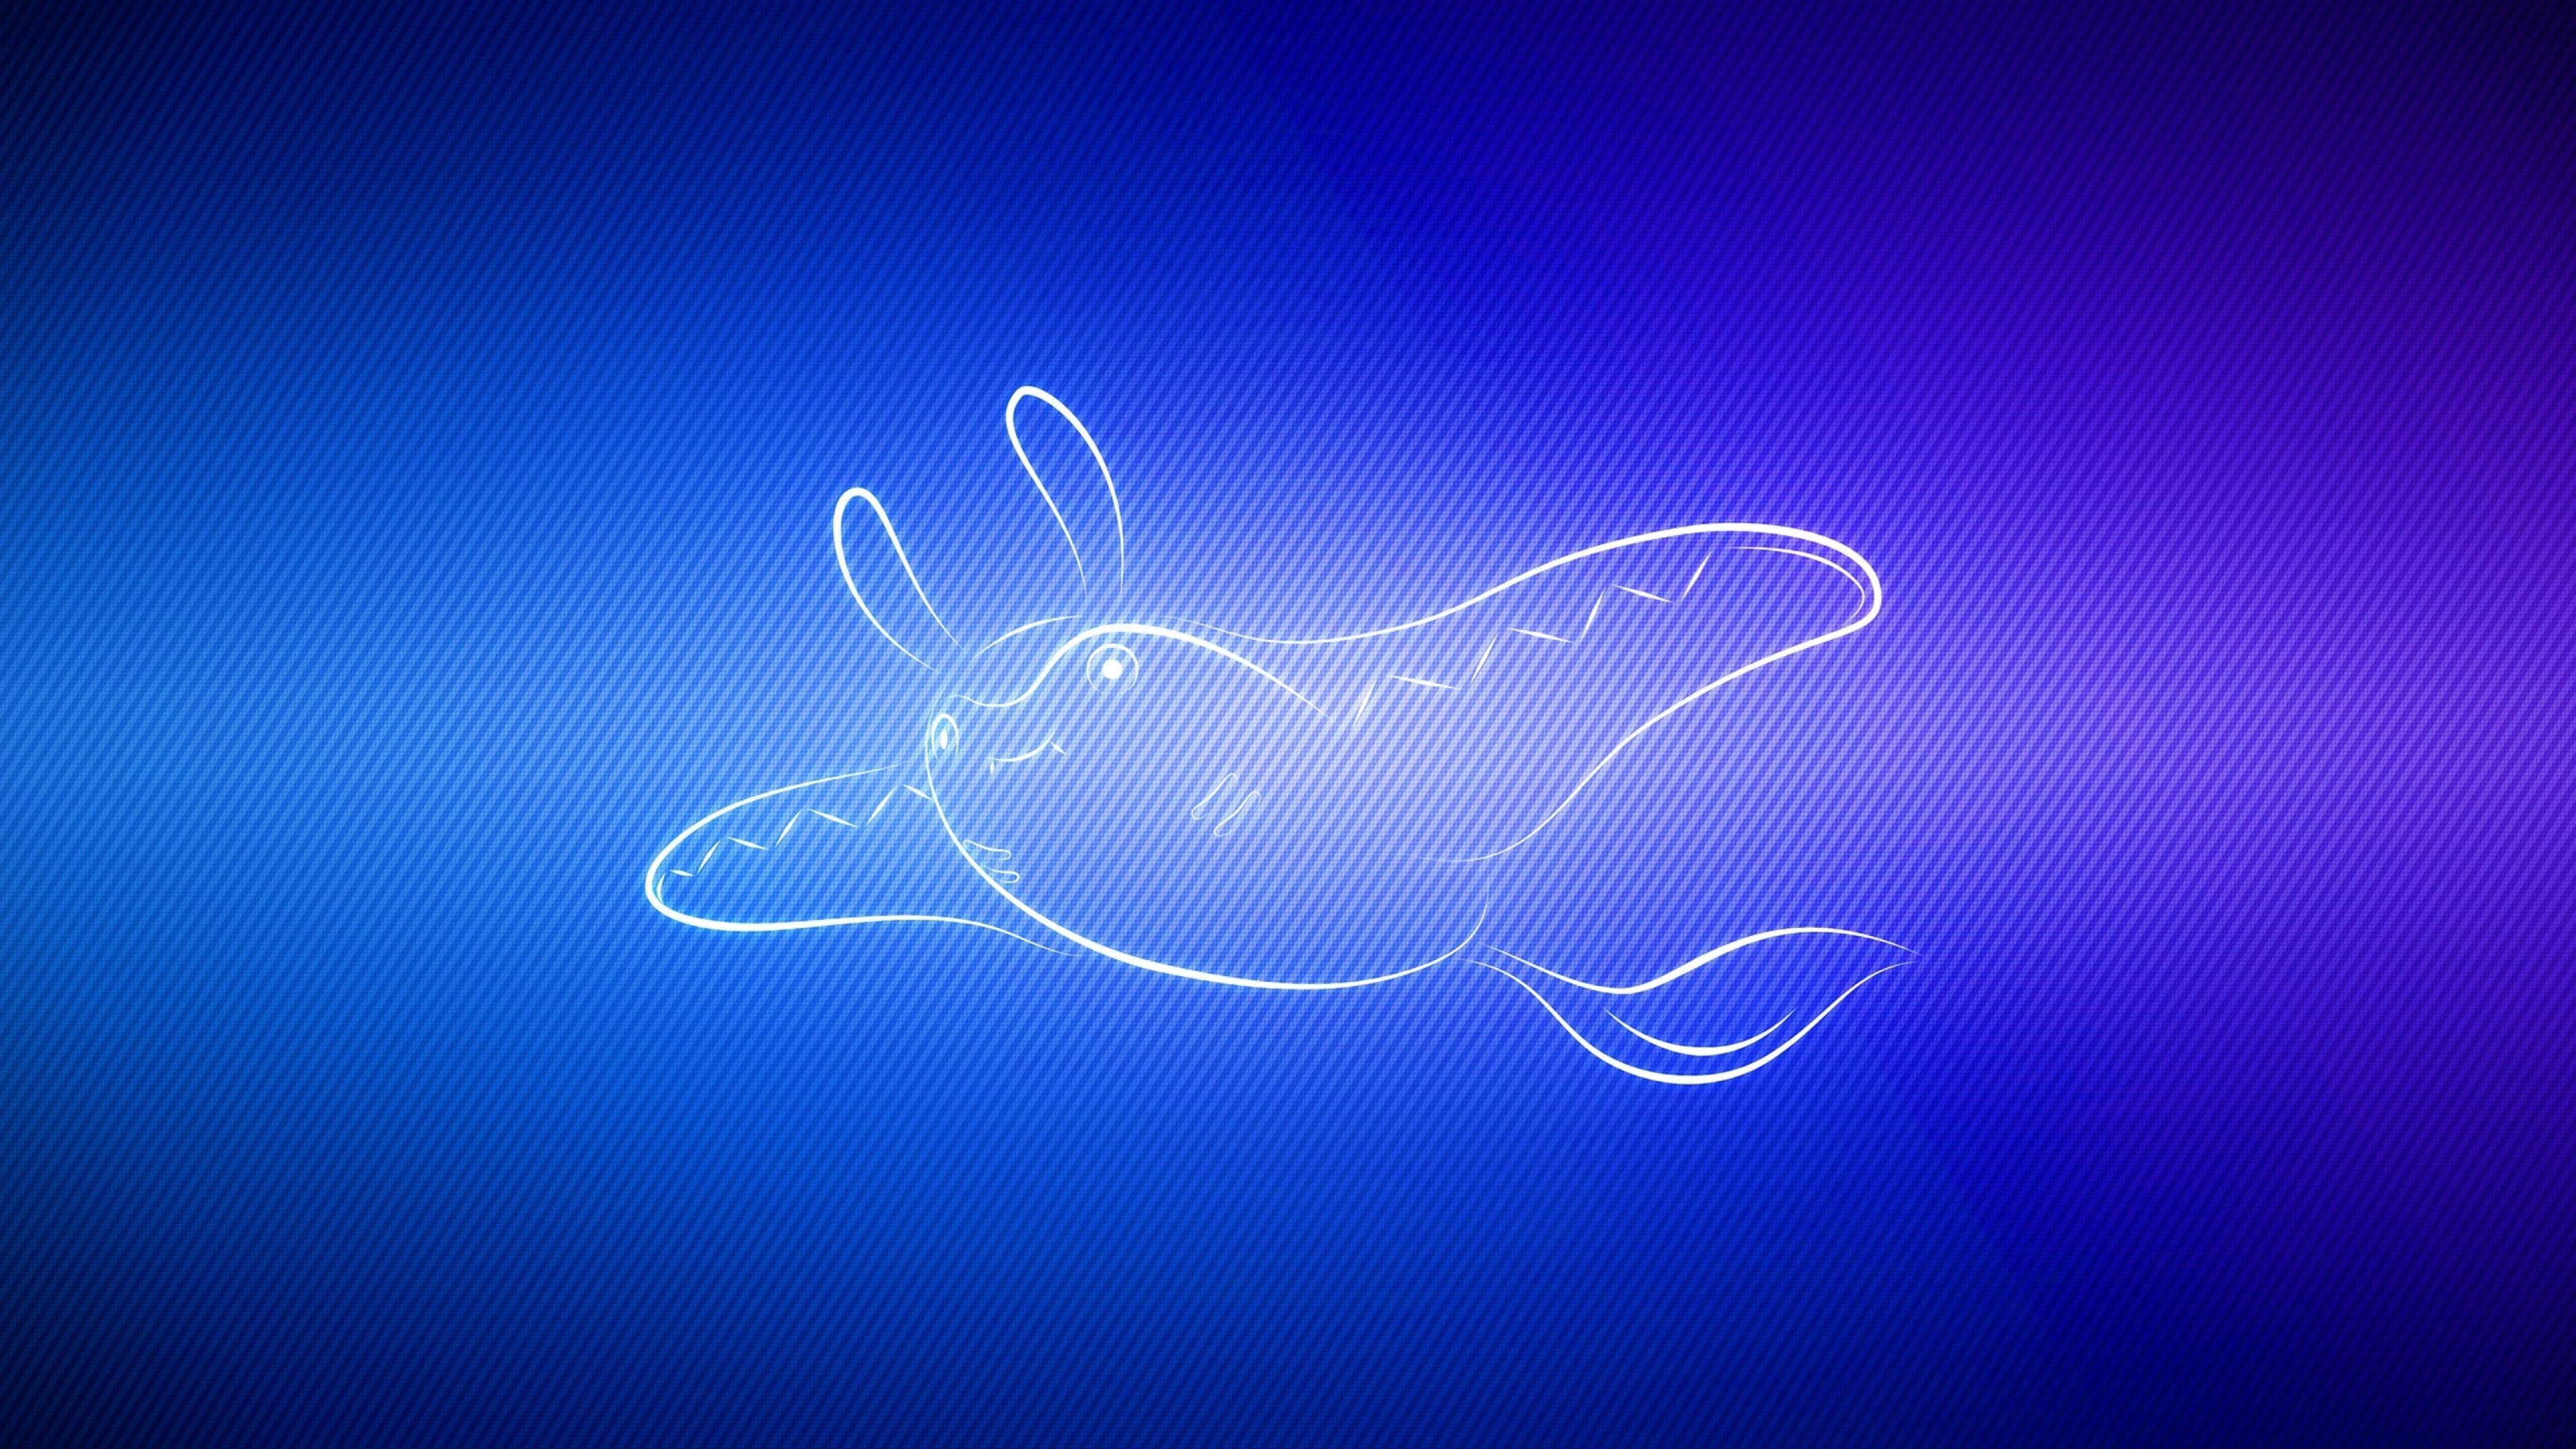 Mantine Hd Wallpapers